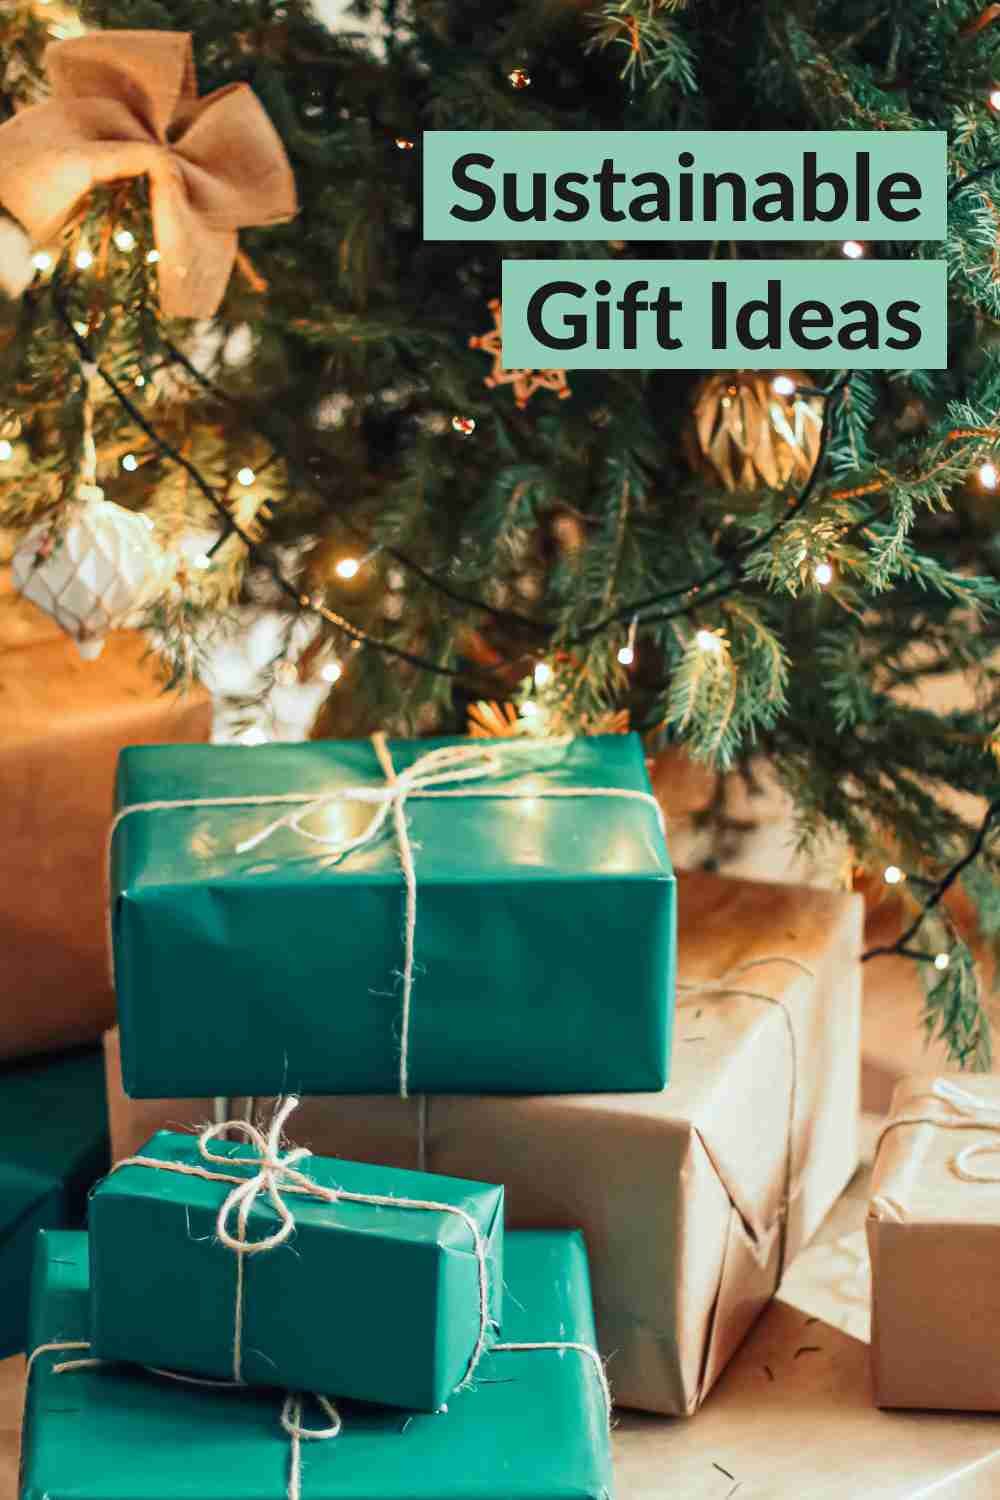 Gifts unwrapped: The history of Christmas presents